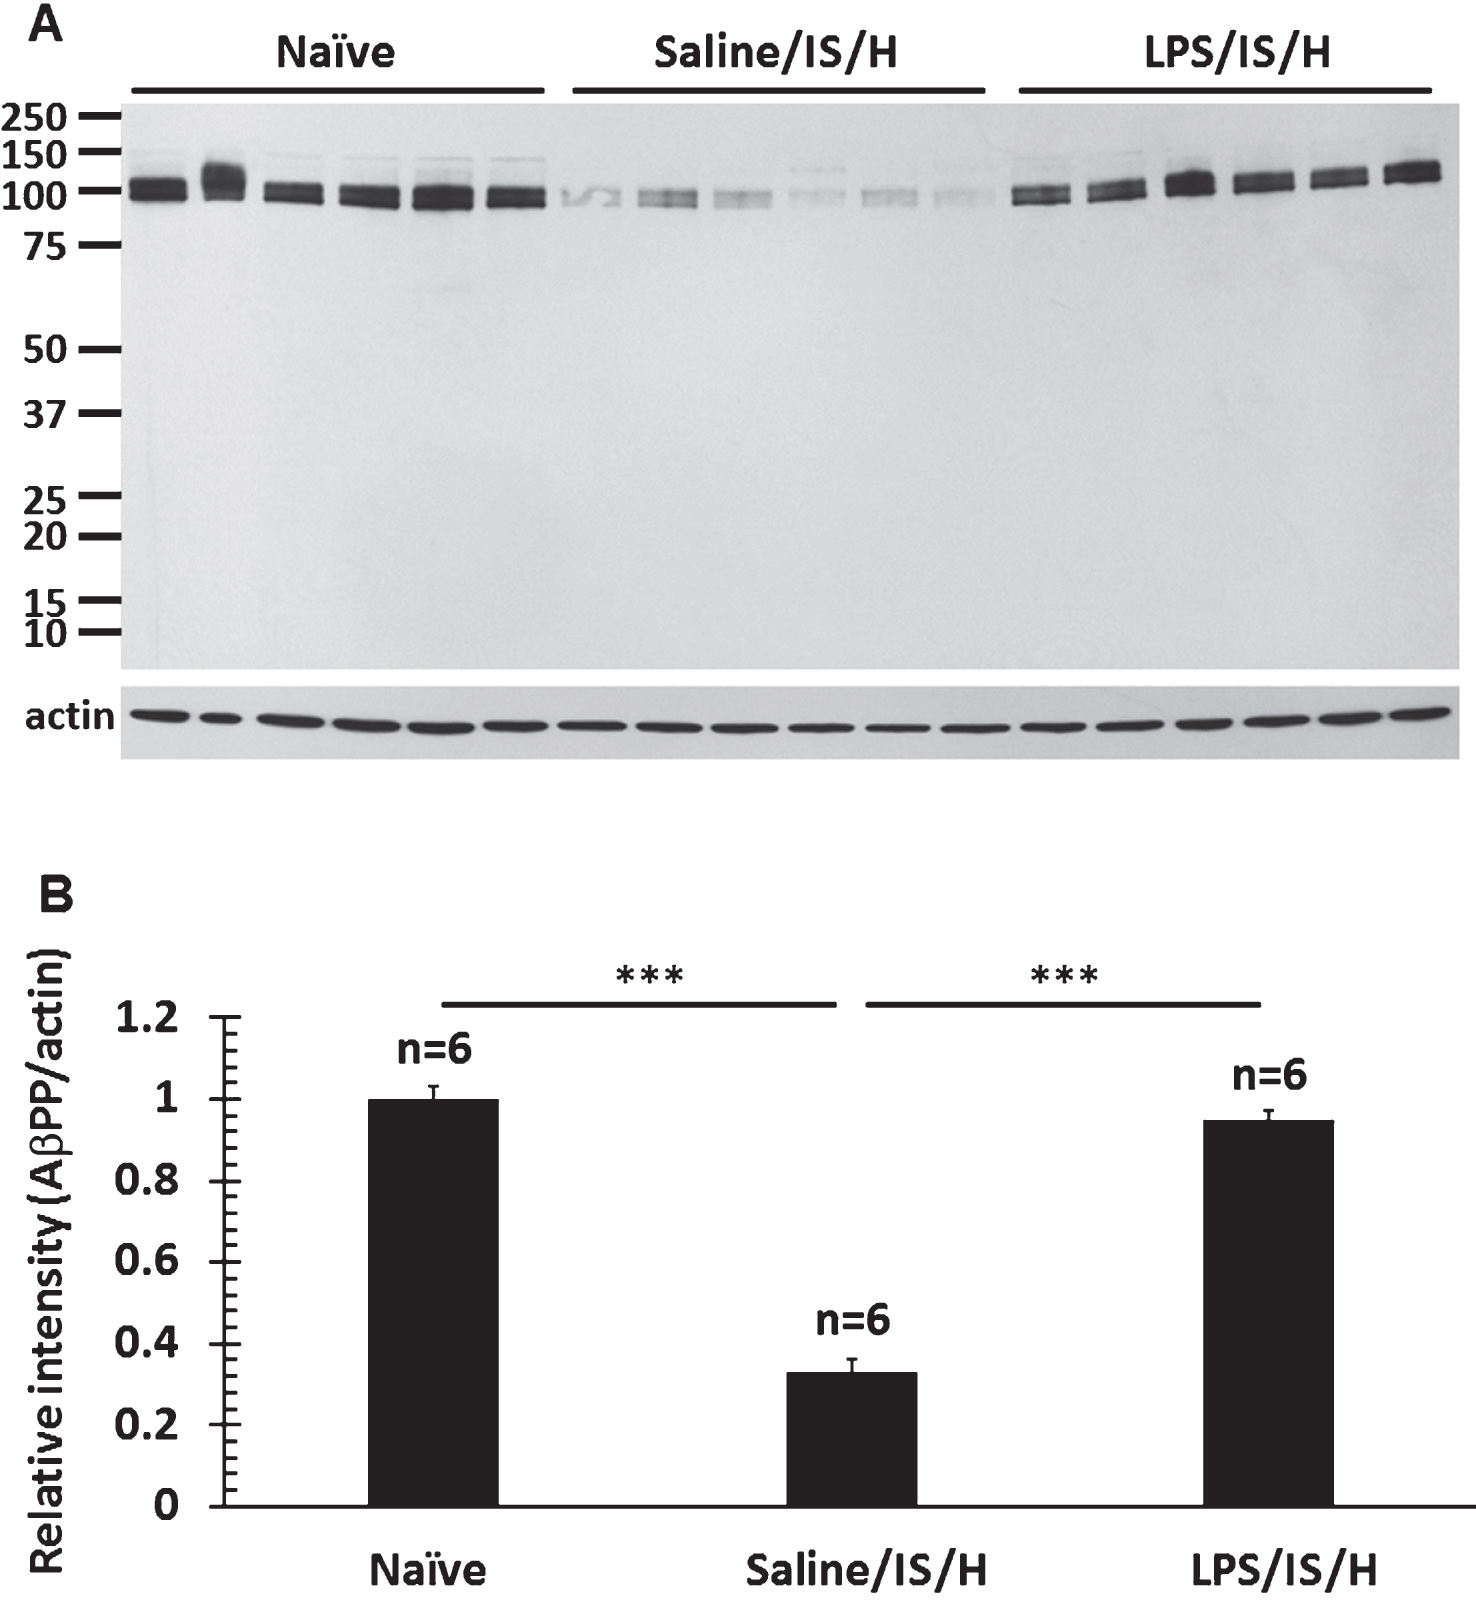 Western blot analysis for amyloid-β protein precursor (AβPP) in the hemisphere ipsilateral to ischemia at 12 weeks following LPS/IS/H and saline/IS/H compared to naïve control. A) A 100 kDa molecular weight protein was detected on Western blot analysis for AβPP either following saline/IS/H or following LPS/IS/H and in the naïve control. B) The expression of AβPP decreased in saline/IS/H animals compared to naïve, and LPS/IS/H increased AβPP compared to saline/IS/H. The expression of AβPP following LPS/IS/H was not significantly different compared to naïve controls. β-actin was used as the loading control.  ***p <  0.001.